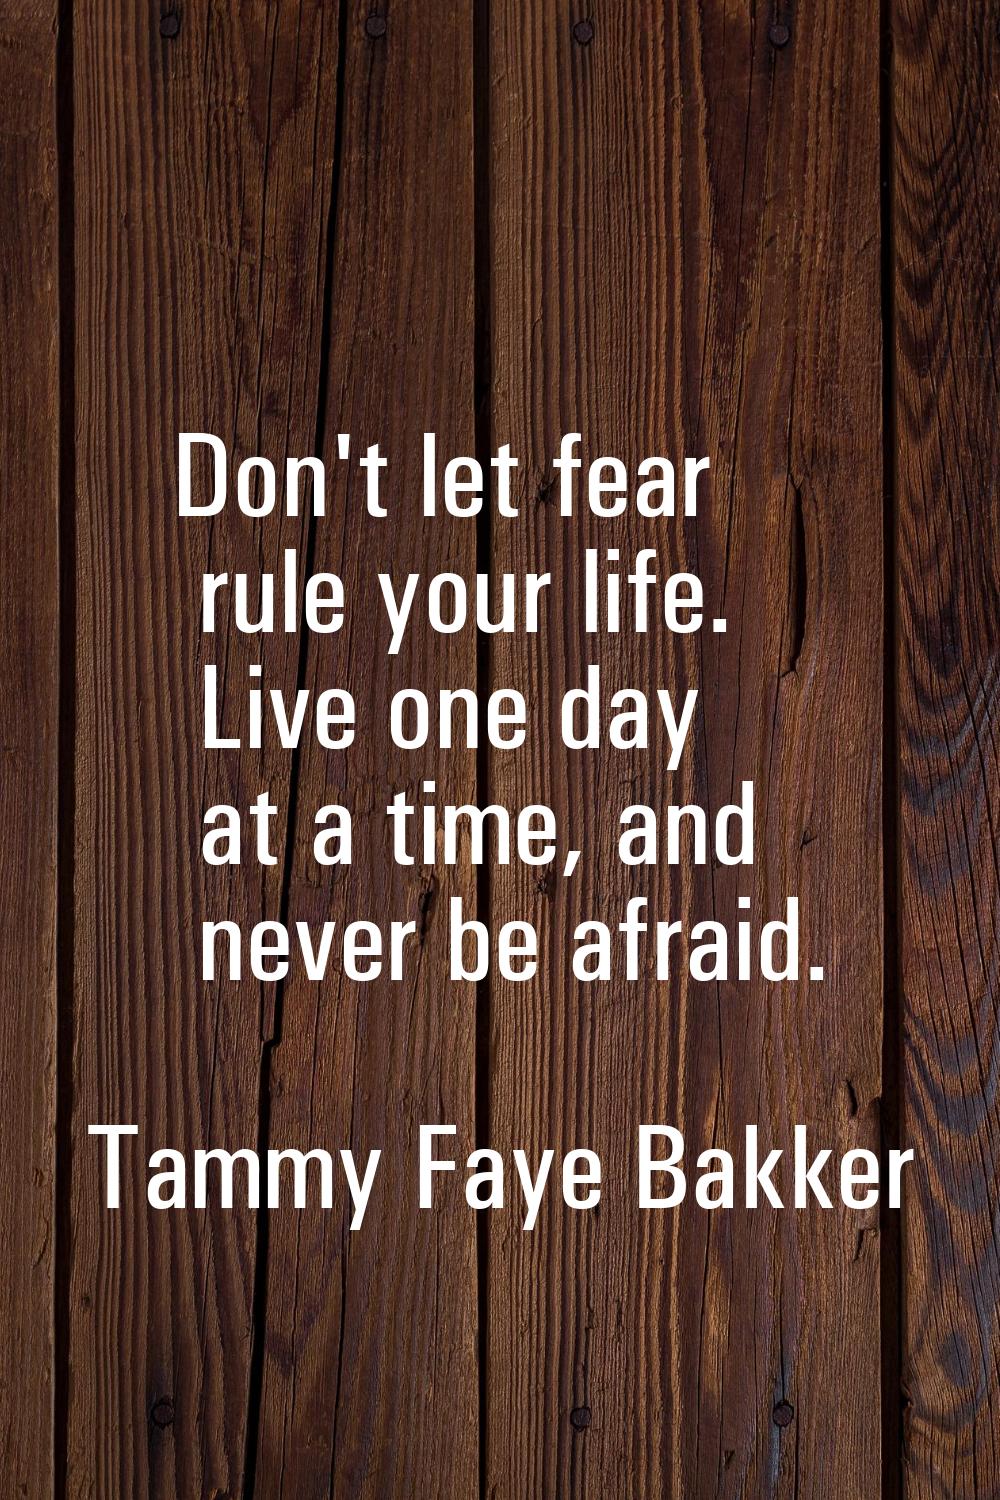 Don't let fear rule your life. Live one day at a time, and never be afraid.